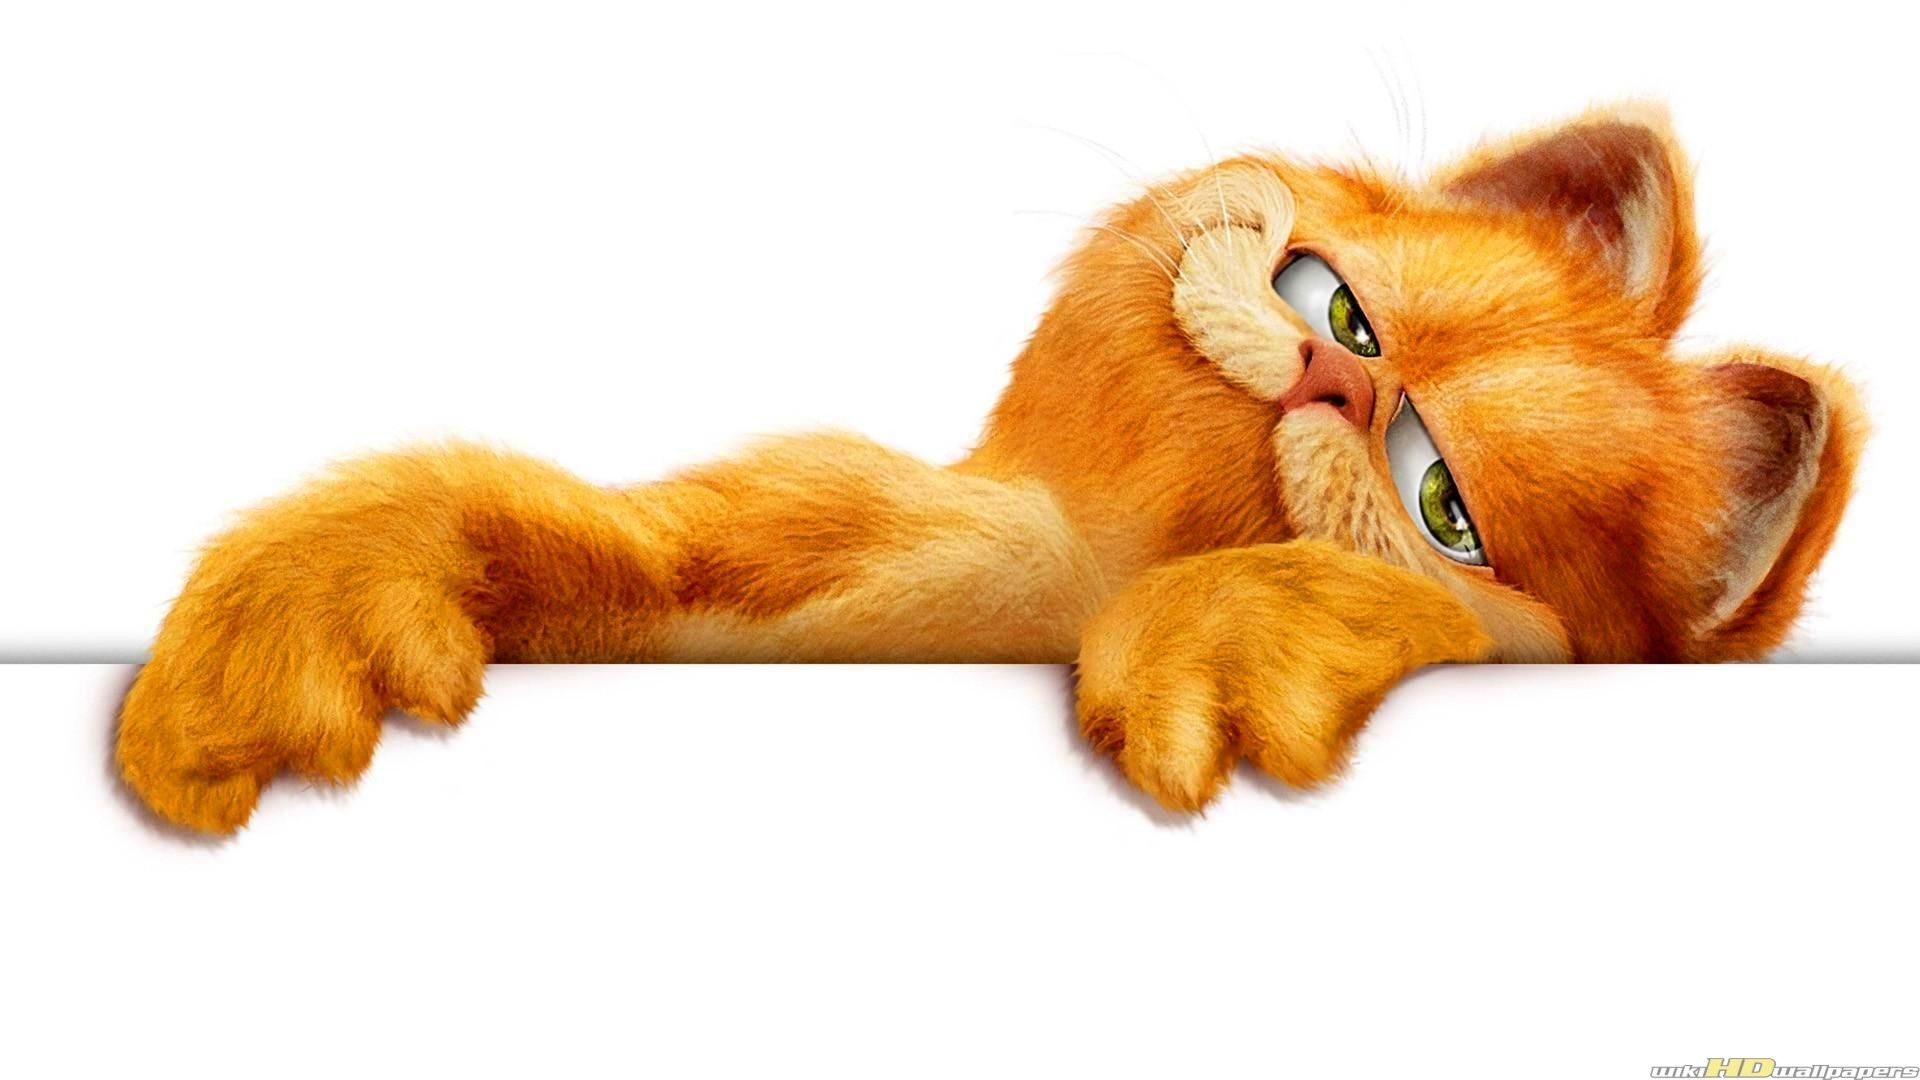 1920x1080 Movies Garfield Cat wallpapers (Desktop, Phone, Tablet) - Awesome .